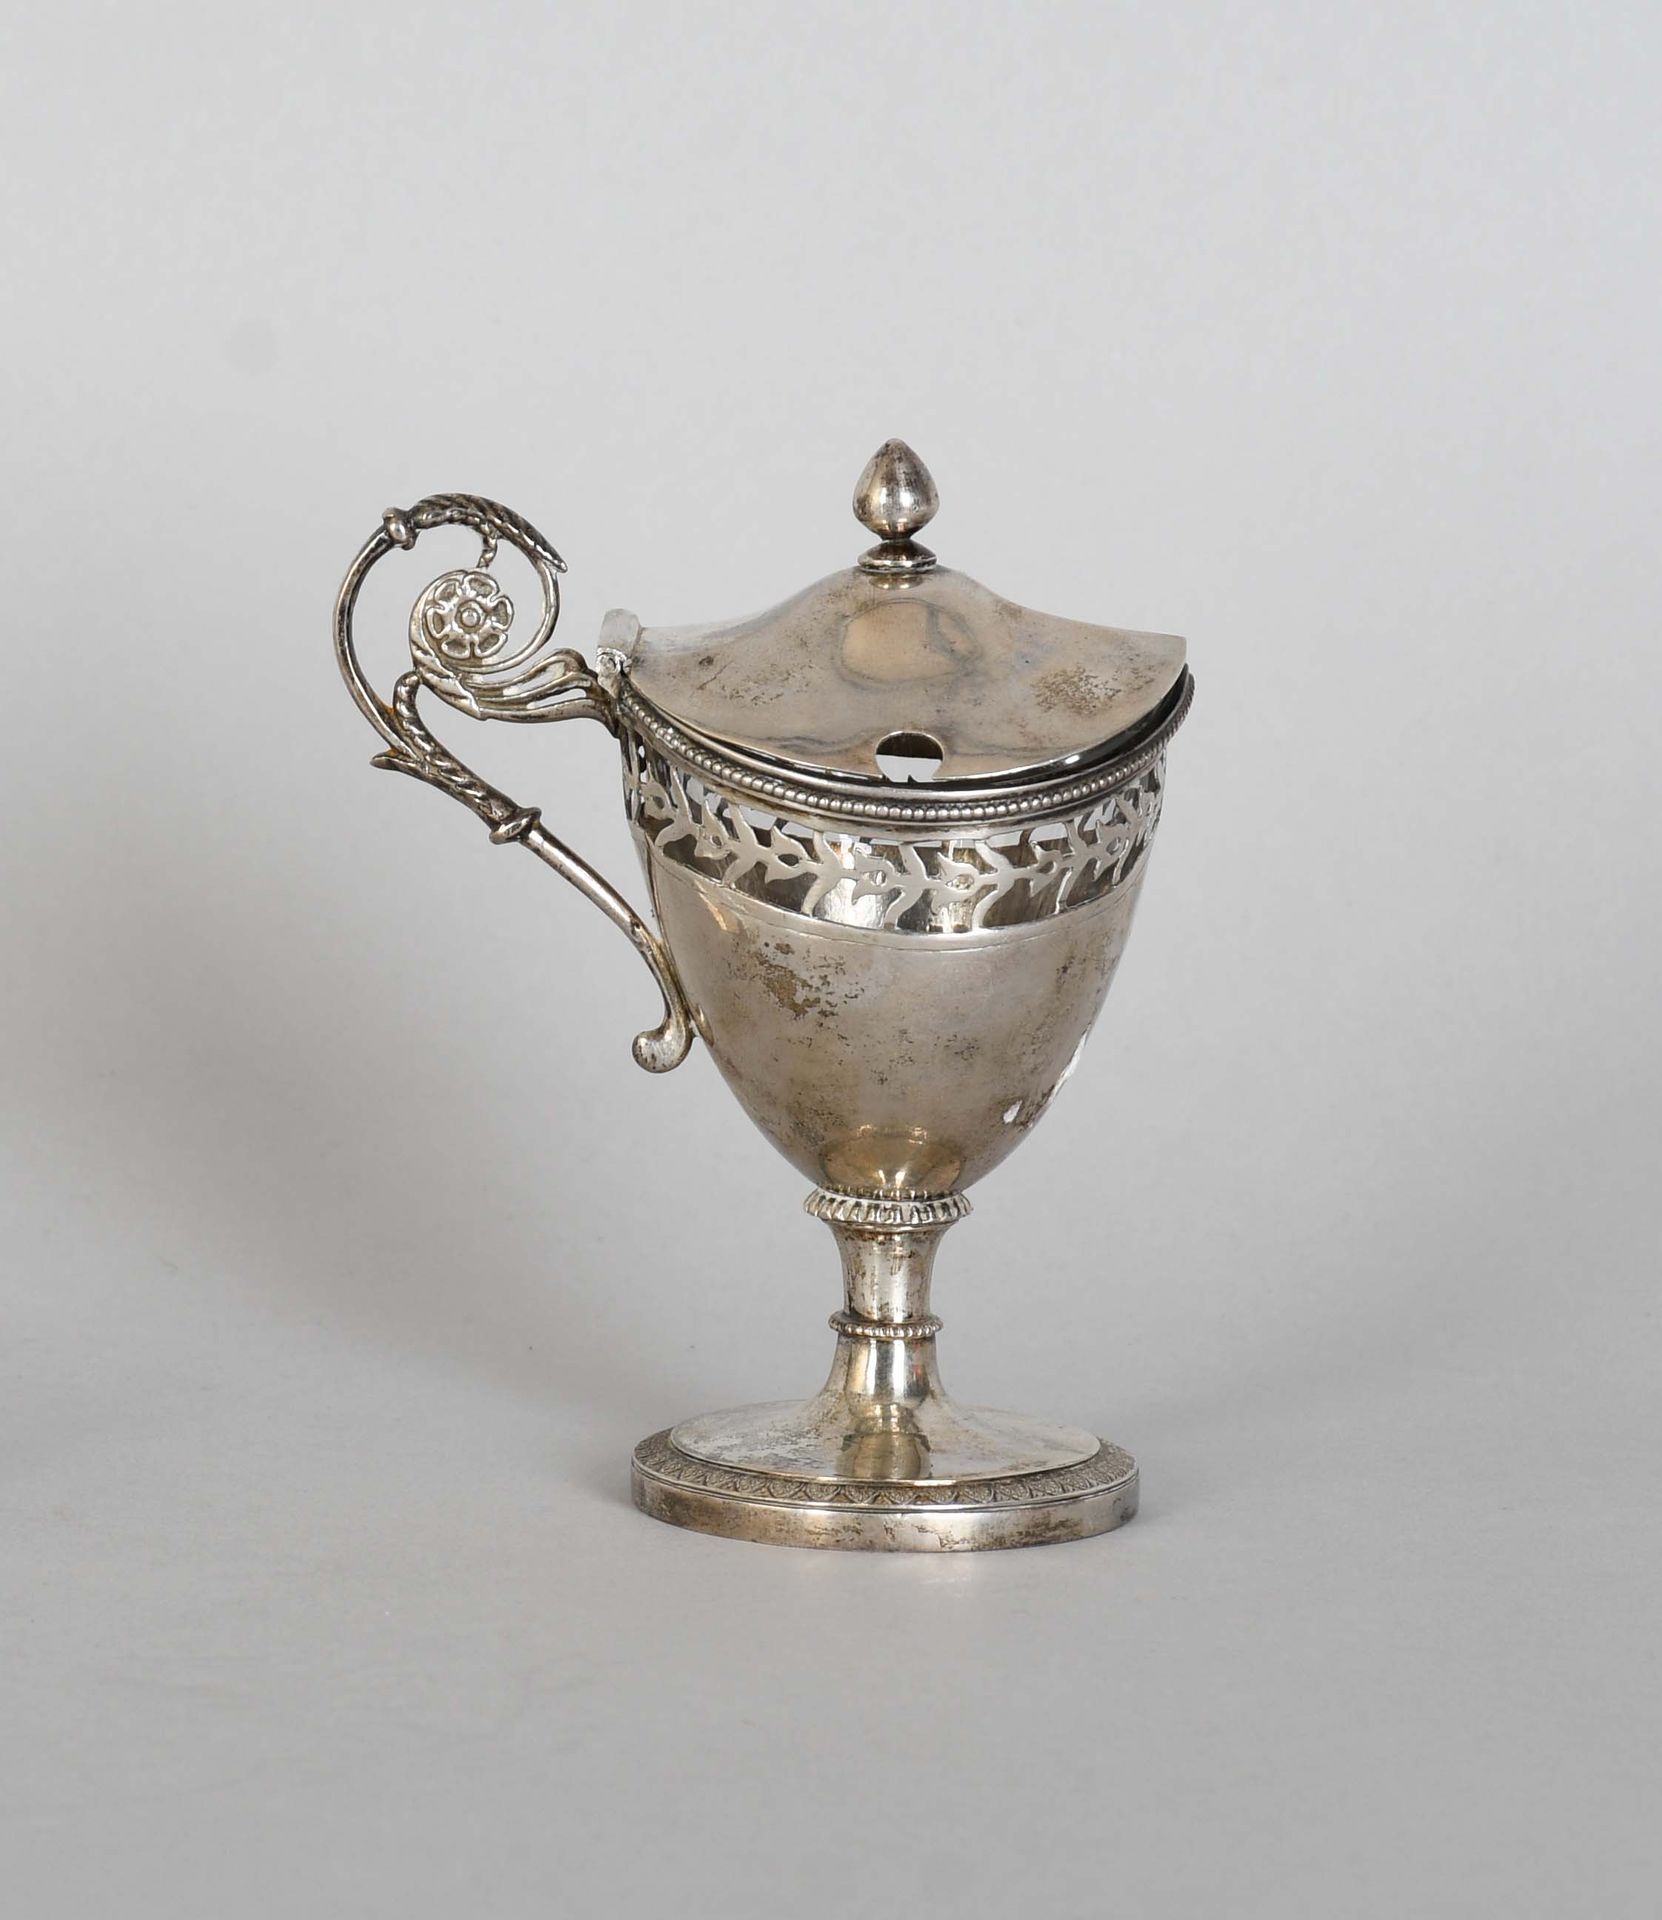 Null Empire silver mustard pot with openwork frieze - The glass container